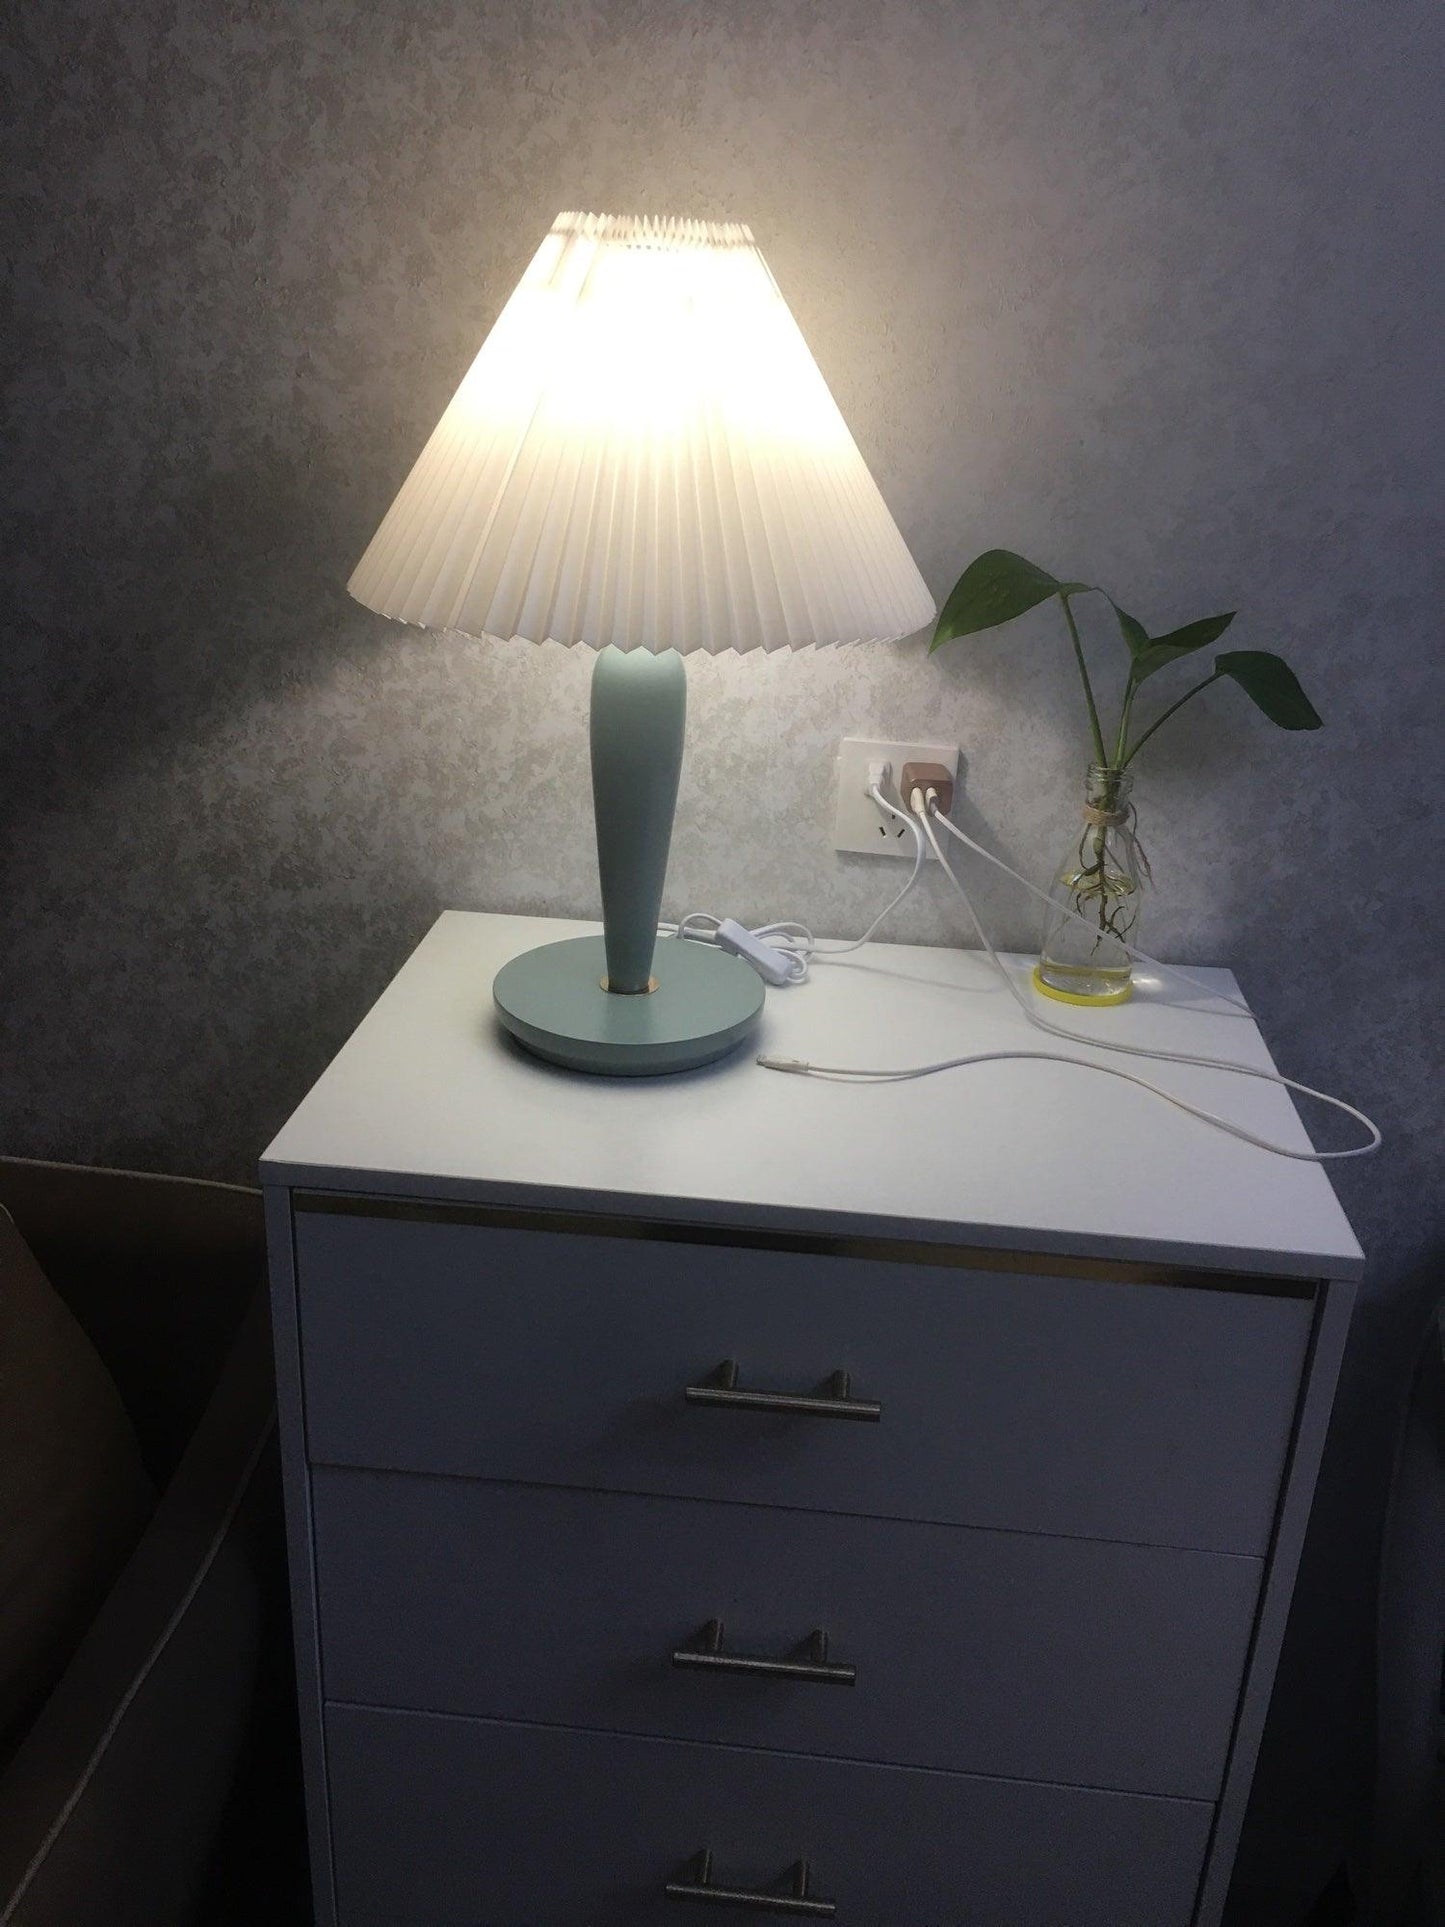 Brentwood Tall Table Lamp